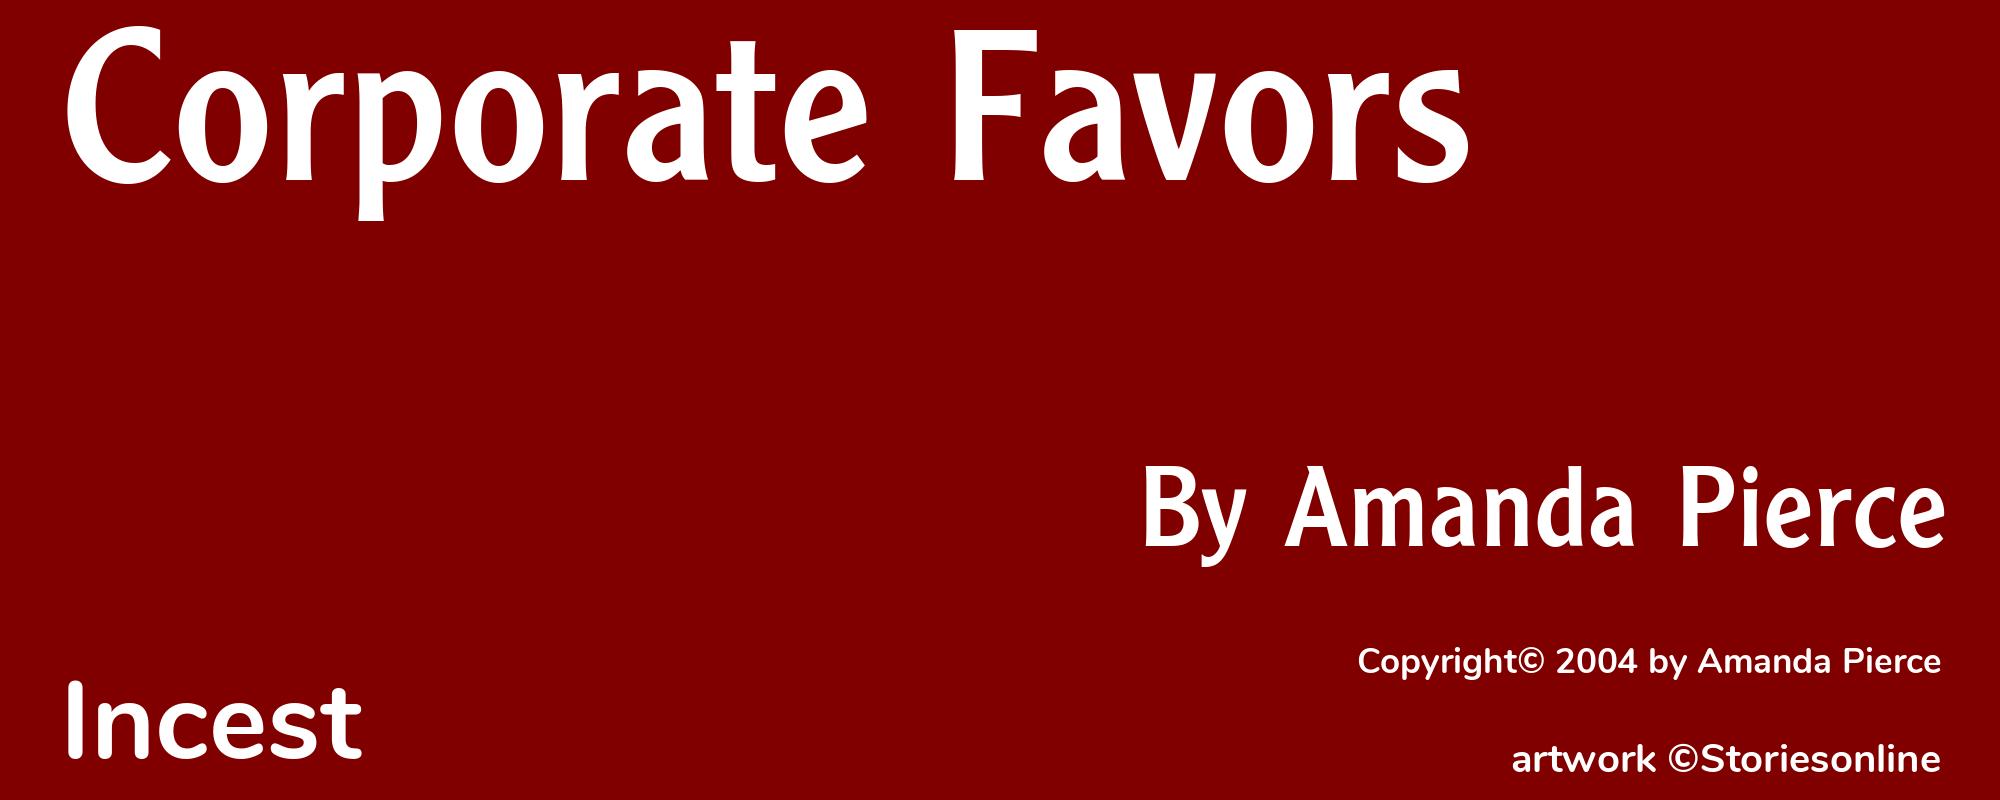 Corporate Favors - Cover